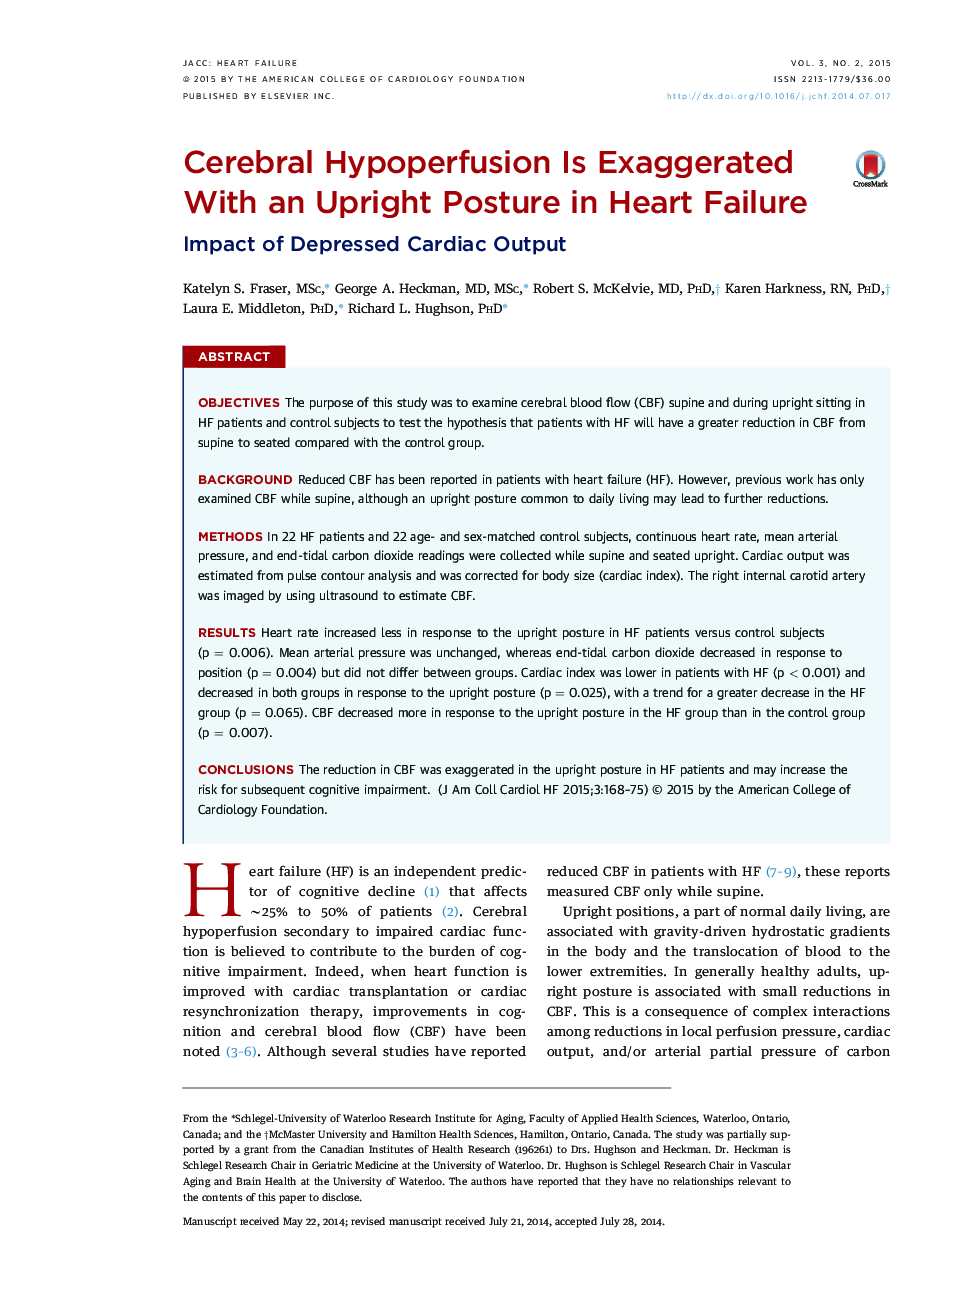 Cerebral Hypoperfusion Is Exaggerated With an Upright Posture in Heart Failure : Impact of Depressed Cardiac Output